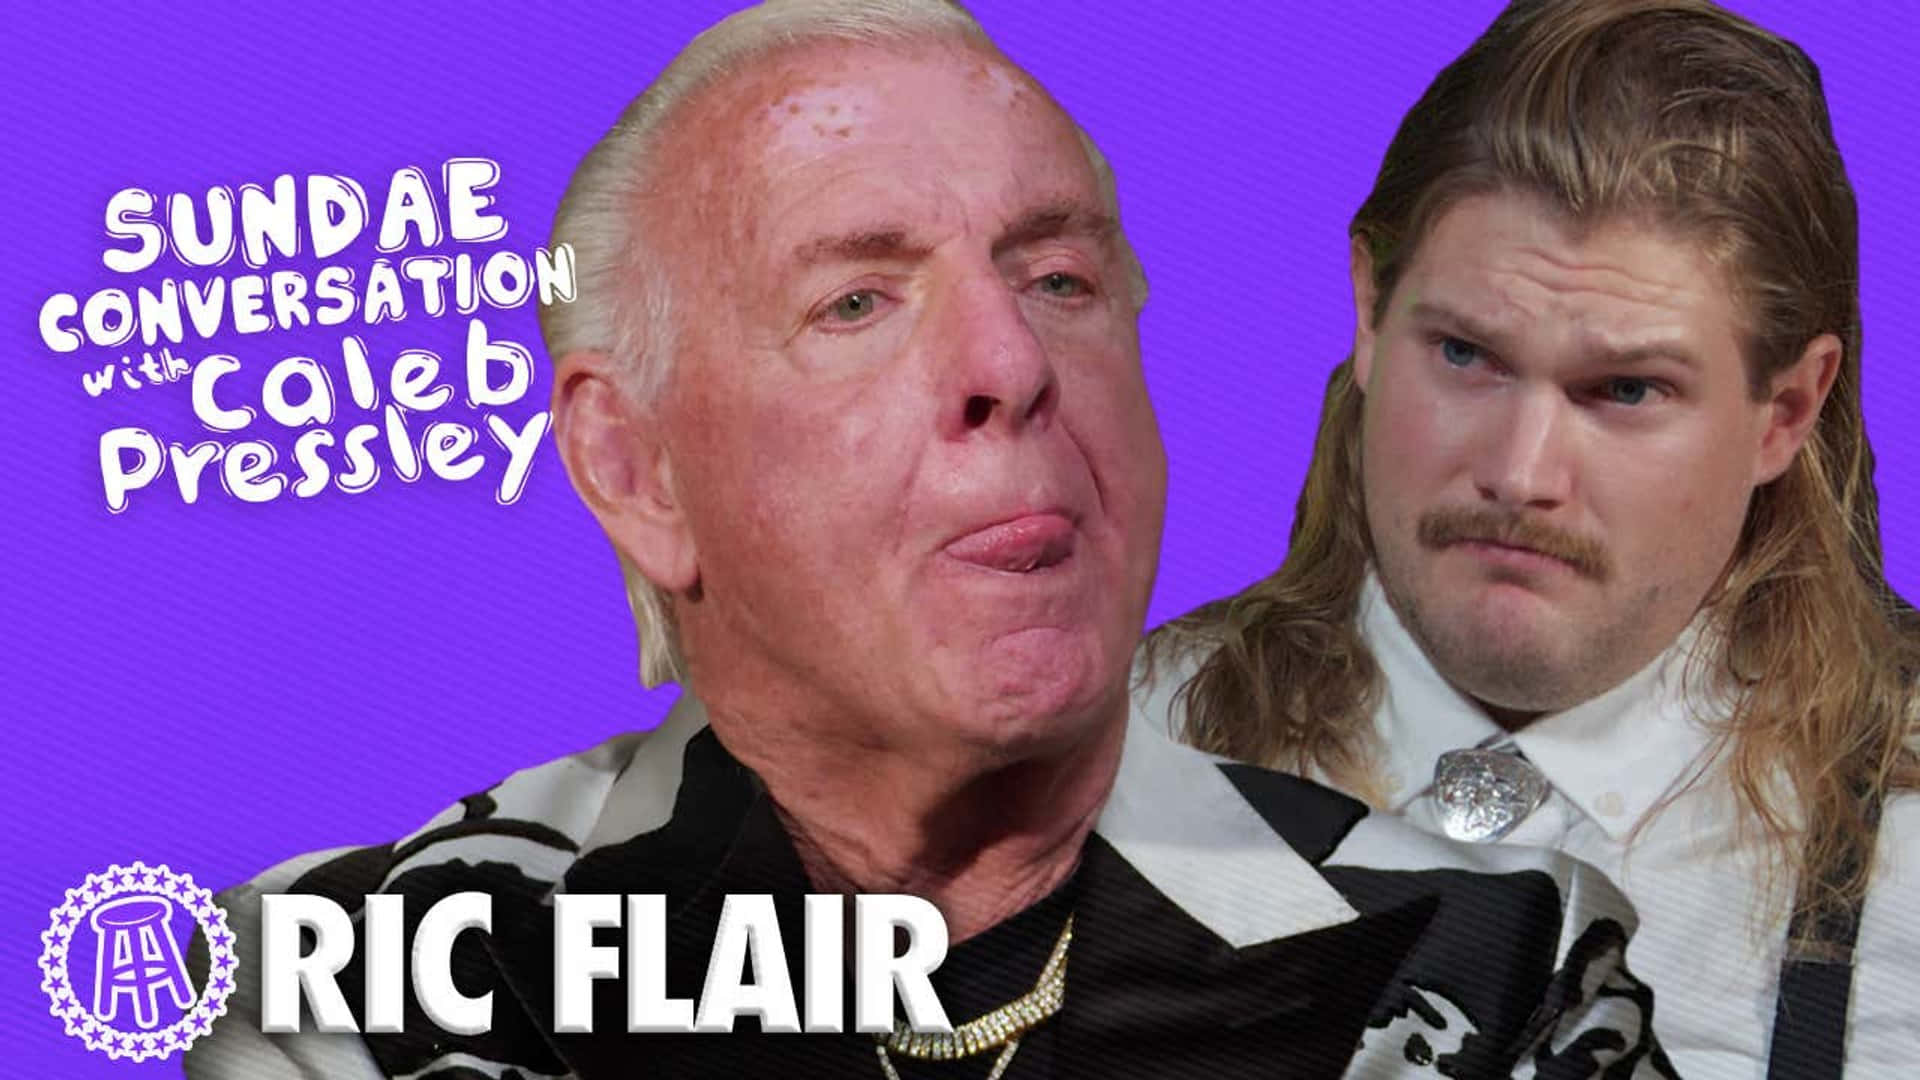 Ric Flair in Conversation with Caleb Pressley Wallpaper